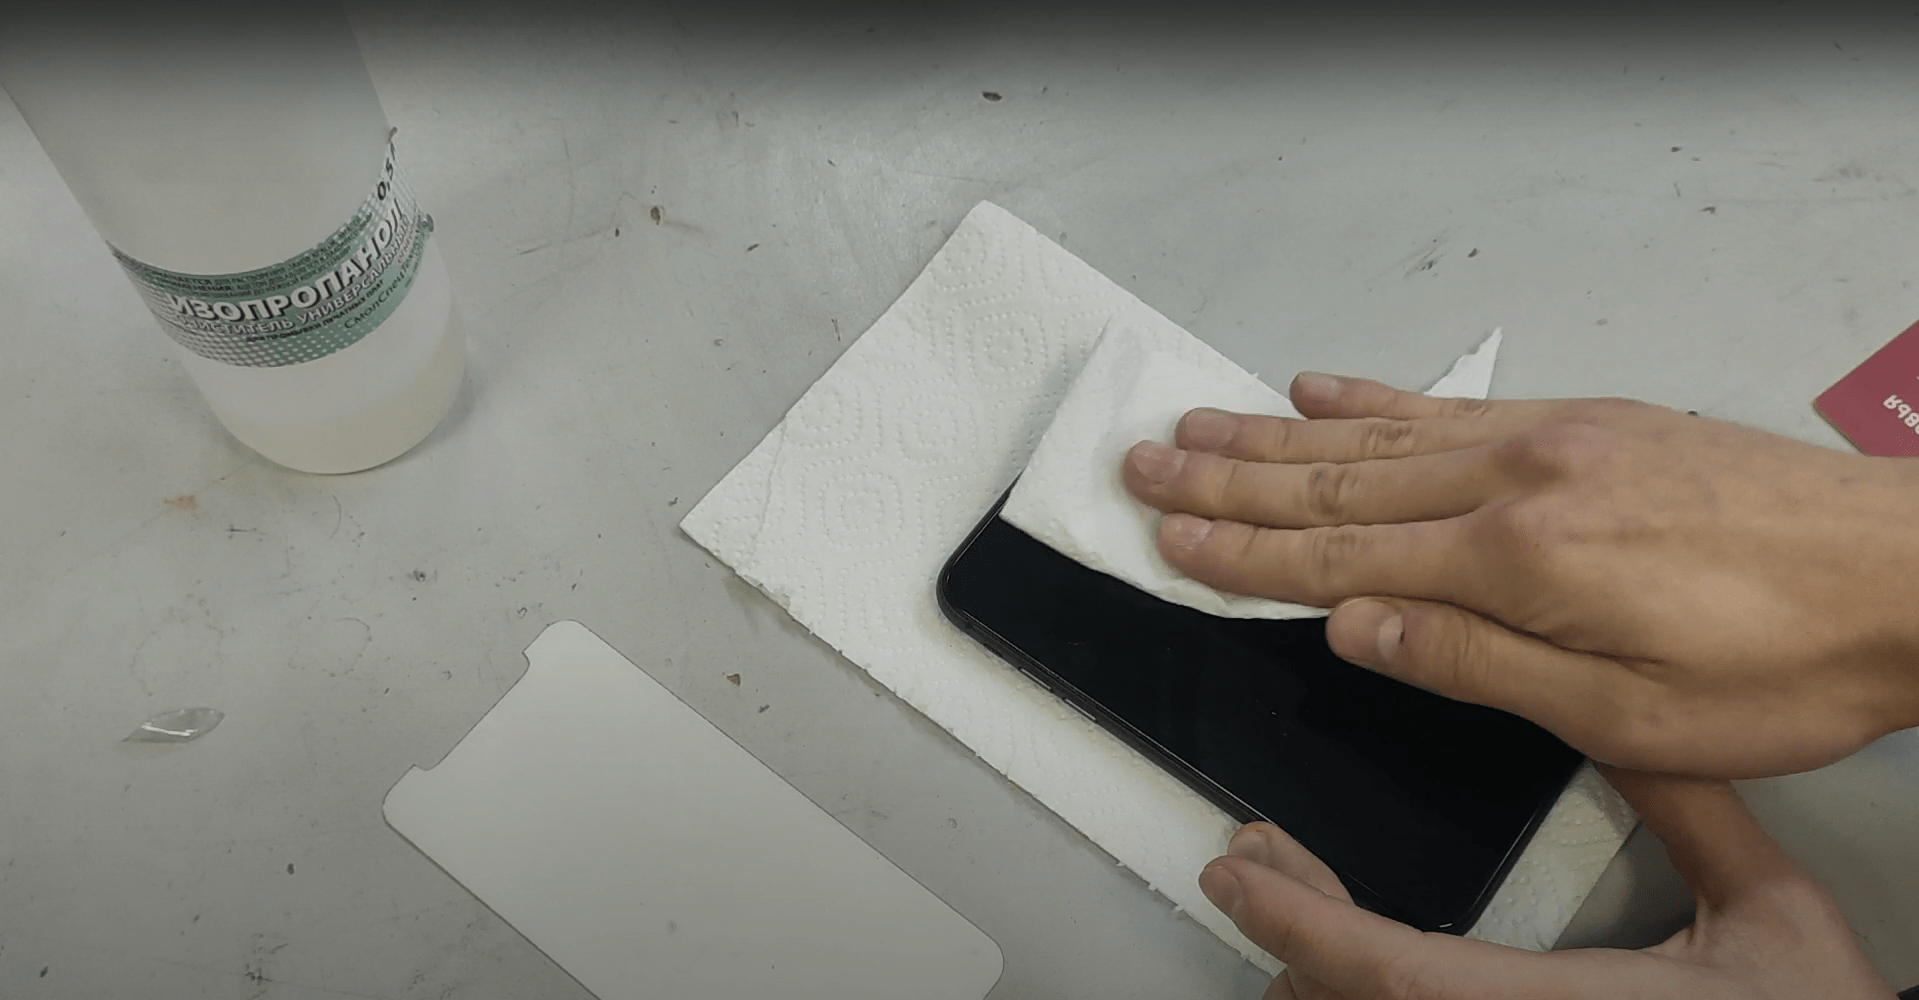 First of all we wipe the phone screen with alcohol to degrease the glass surface and prepare it for pasting.